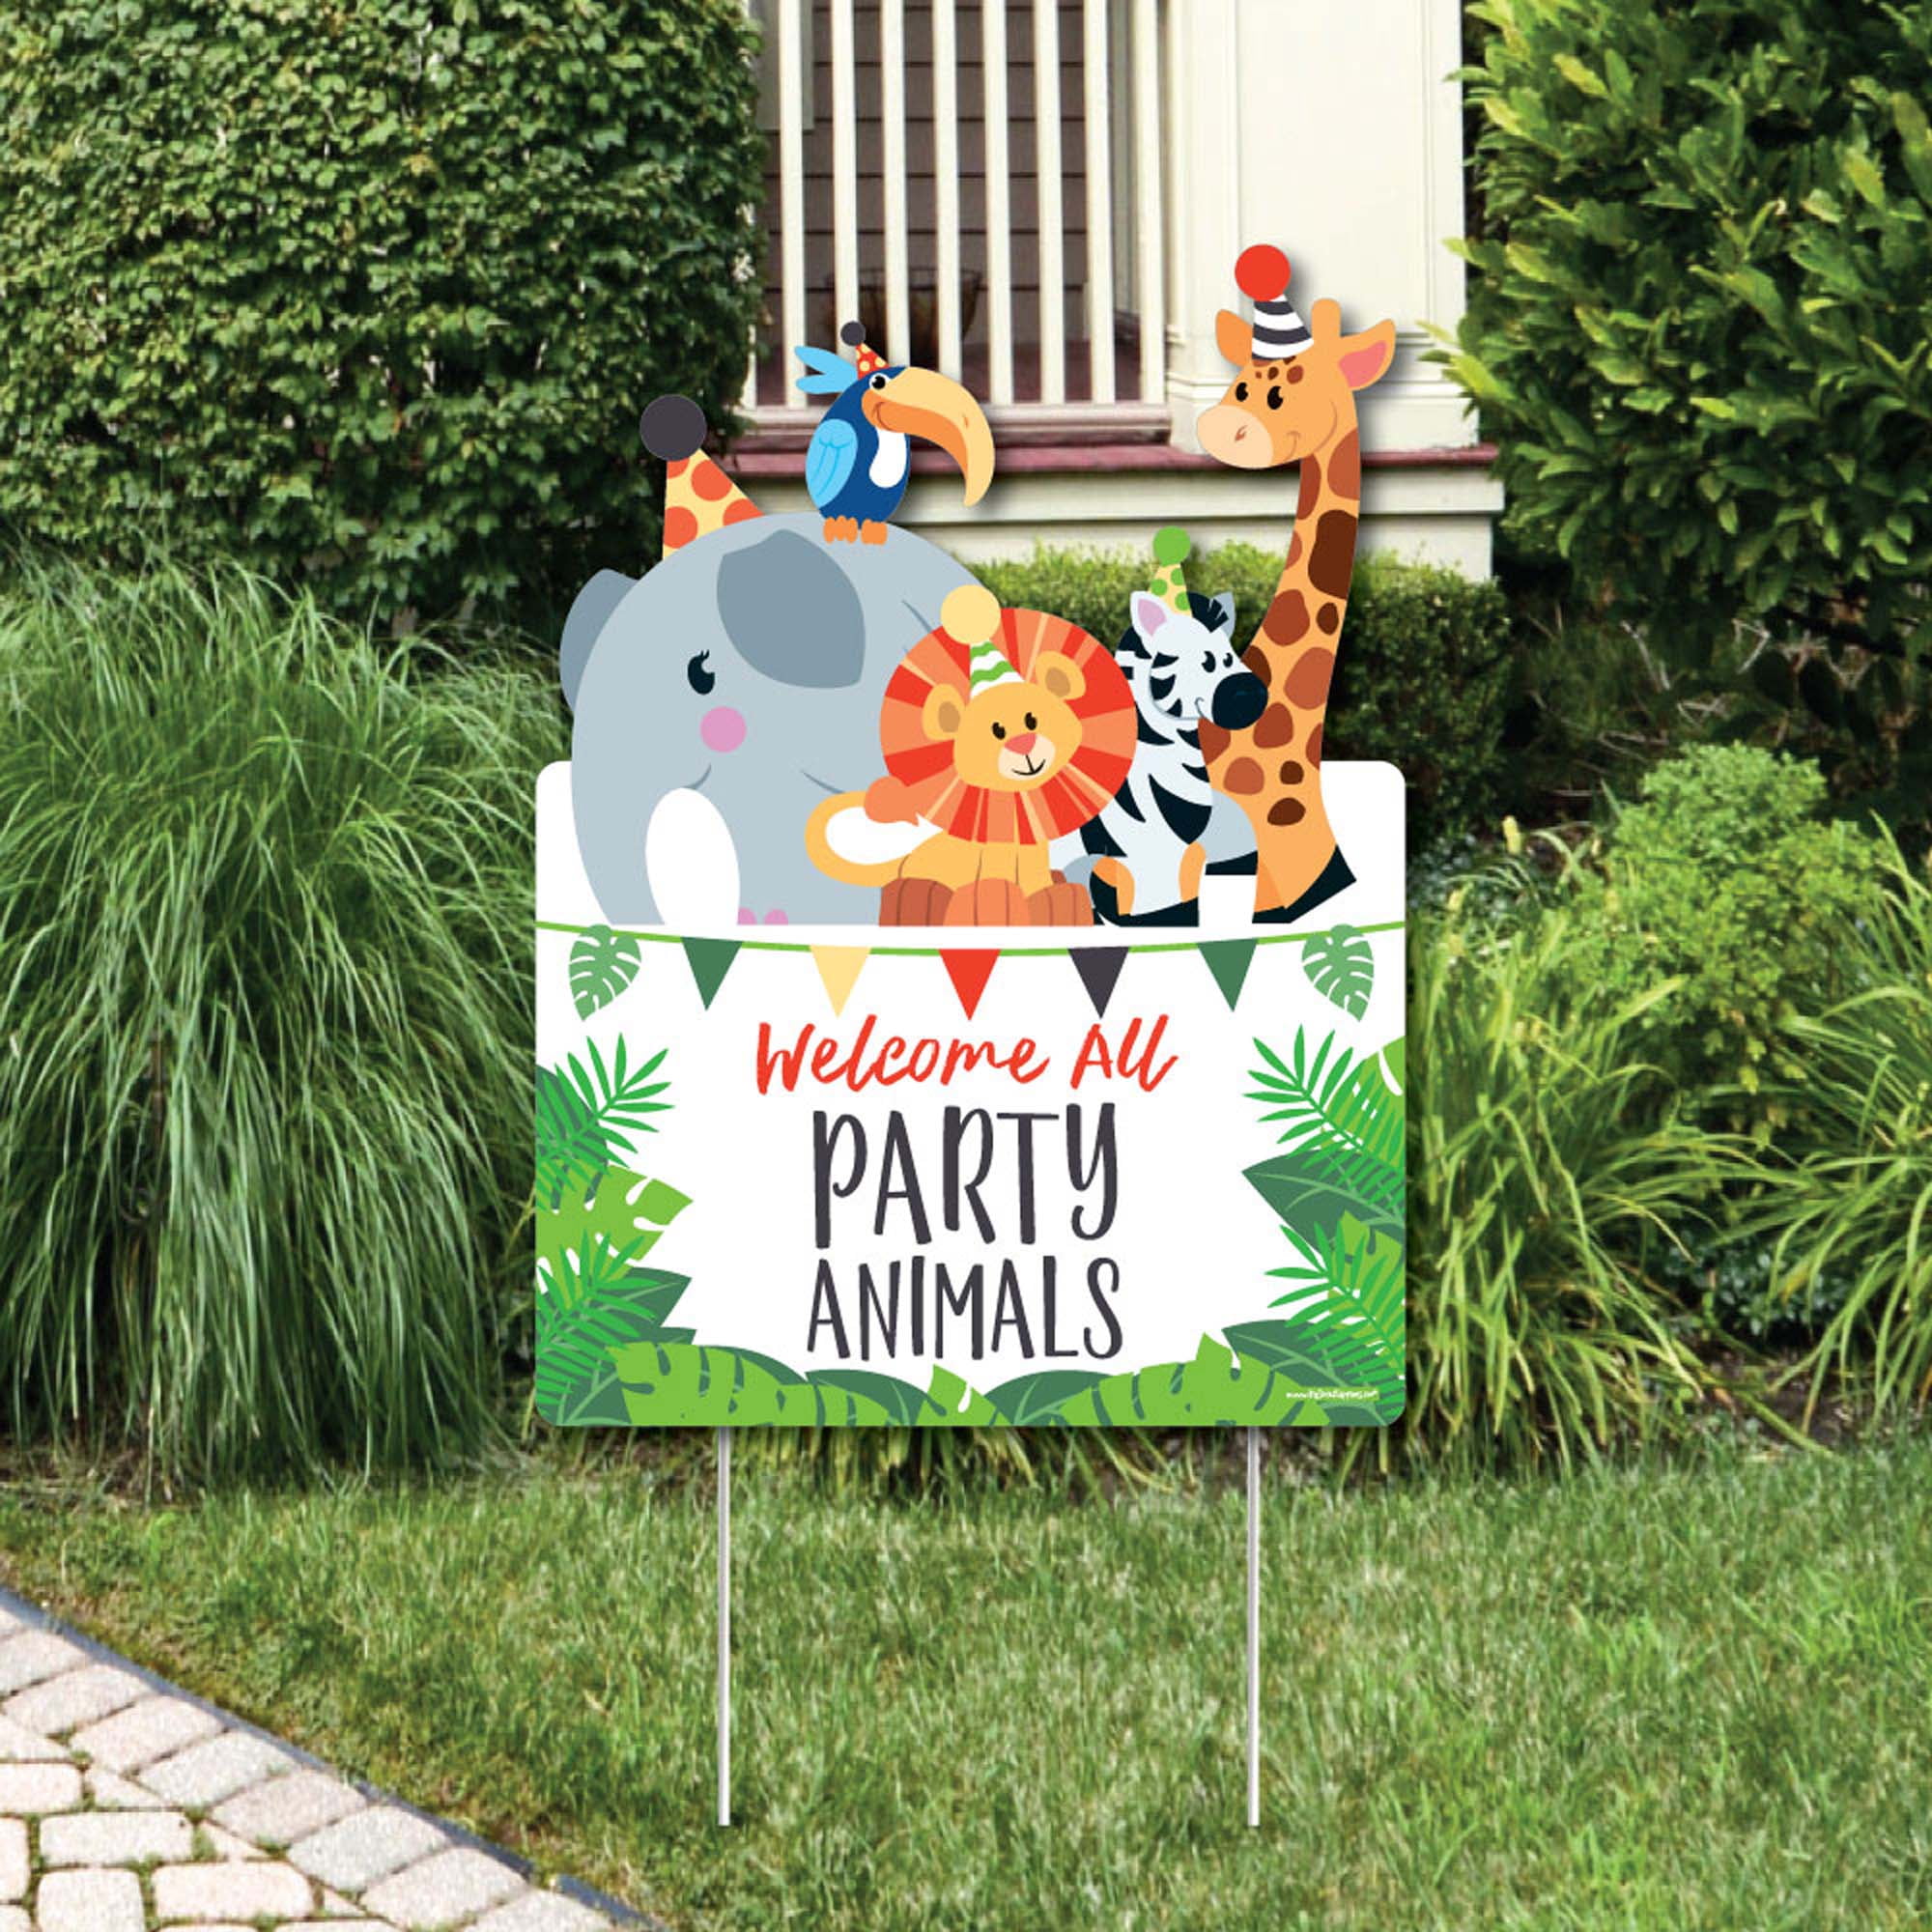 Pretty UR Party The Jungle Book Birthday Party Decorations Kit, The Jungle Book  party Supplies Price in India - Buy Pretty UR Party The Jungle Book  Birthday Party Decorations Kit, The Jungle